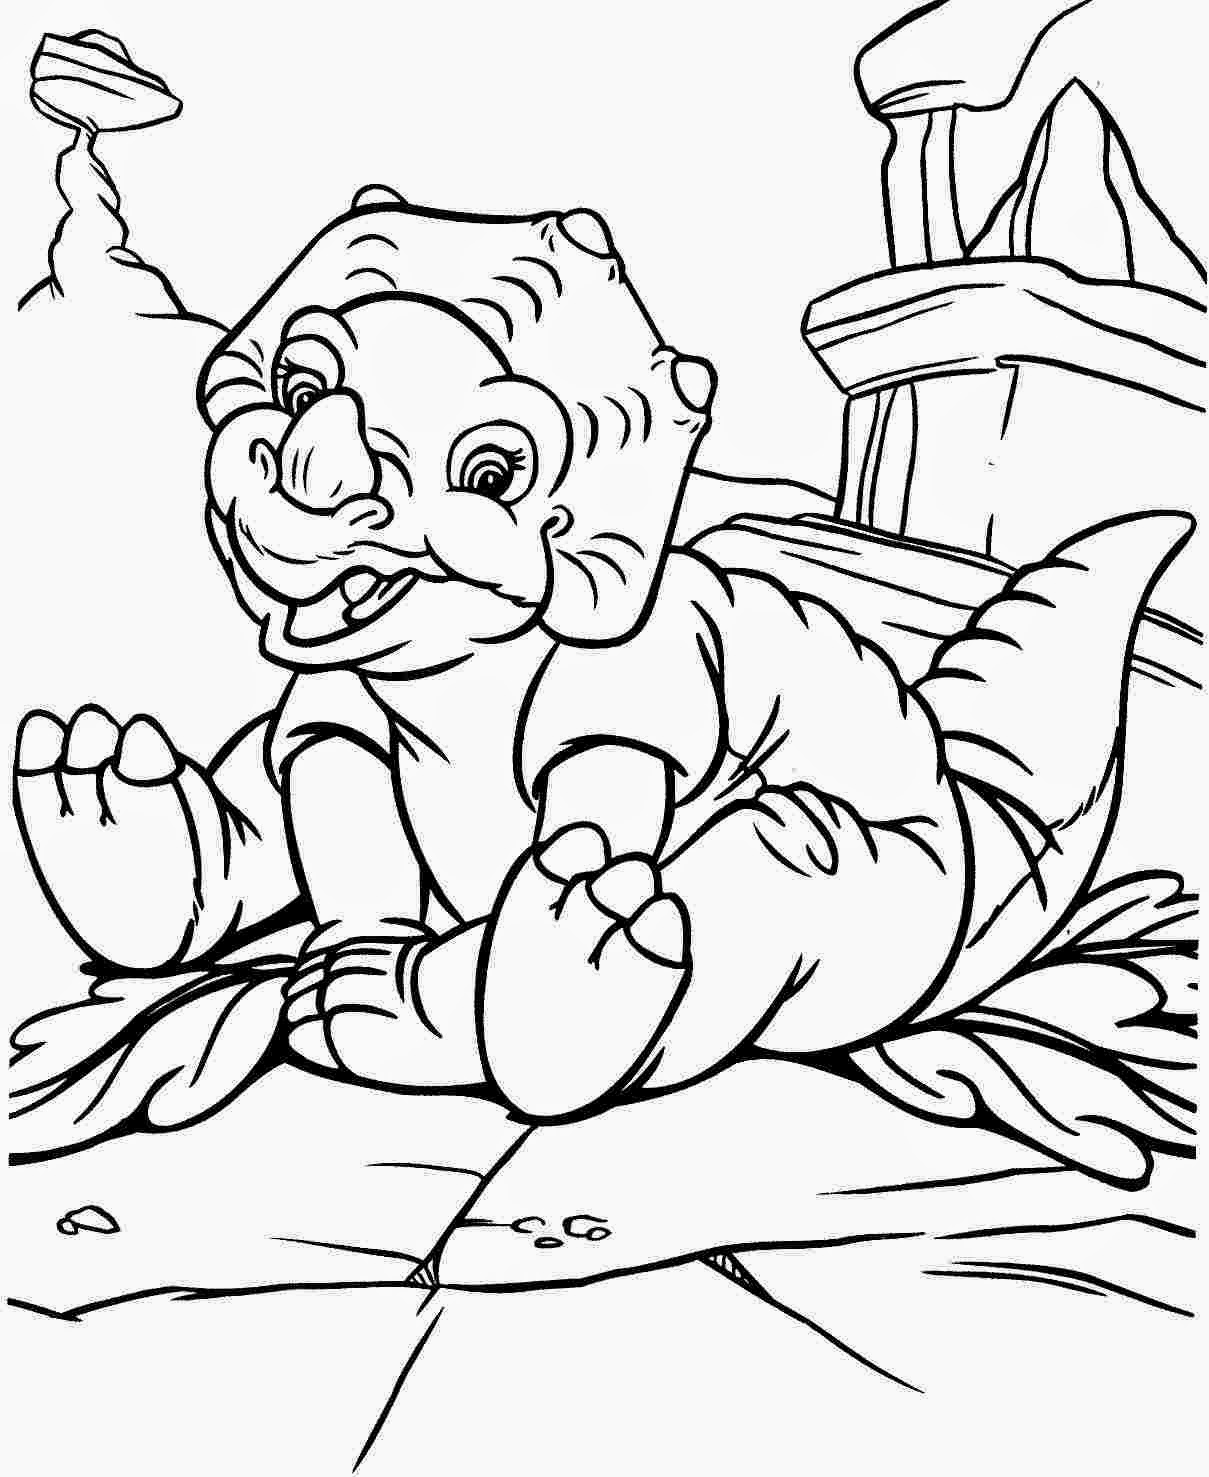 coloring-pages-dinosaur-free-printable-coloring-pages